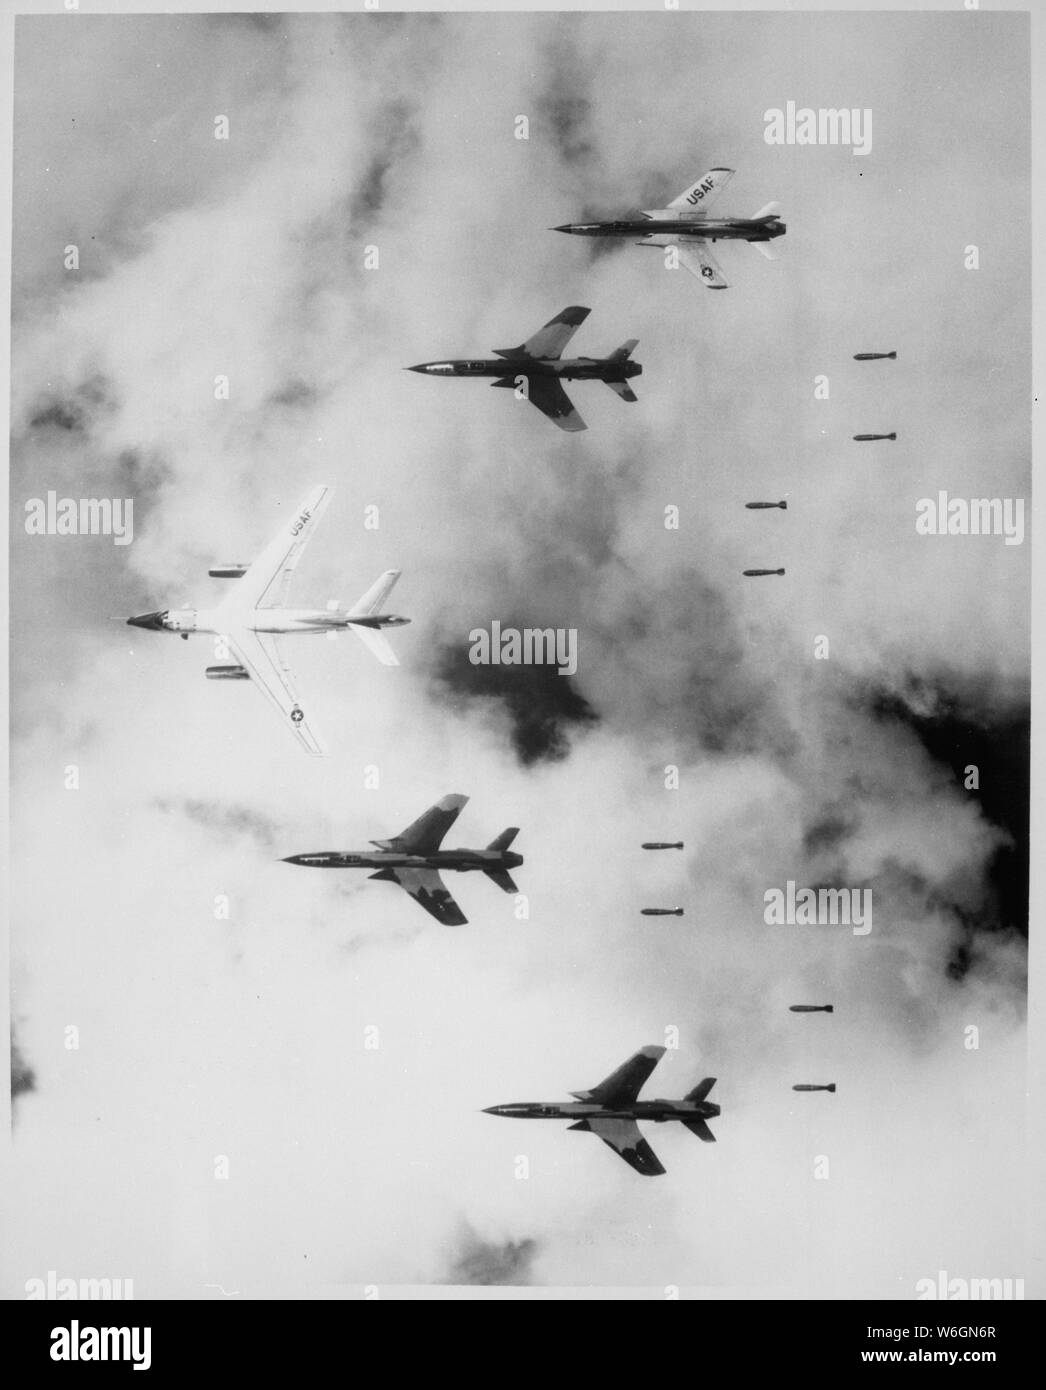 Flying under radar control with a B-66 Destroyer, Air Force F-105 Thunderchief pilots bomb a military target through low clouds over the southern panhandle of North Viet Nam., 07/14/1966; General notes:  Use War and Conflict Number 417 when ordering a reproduction or requesting information about this image. Stock Photo